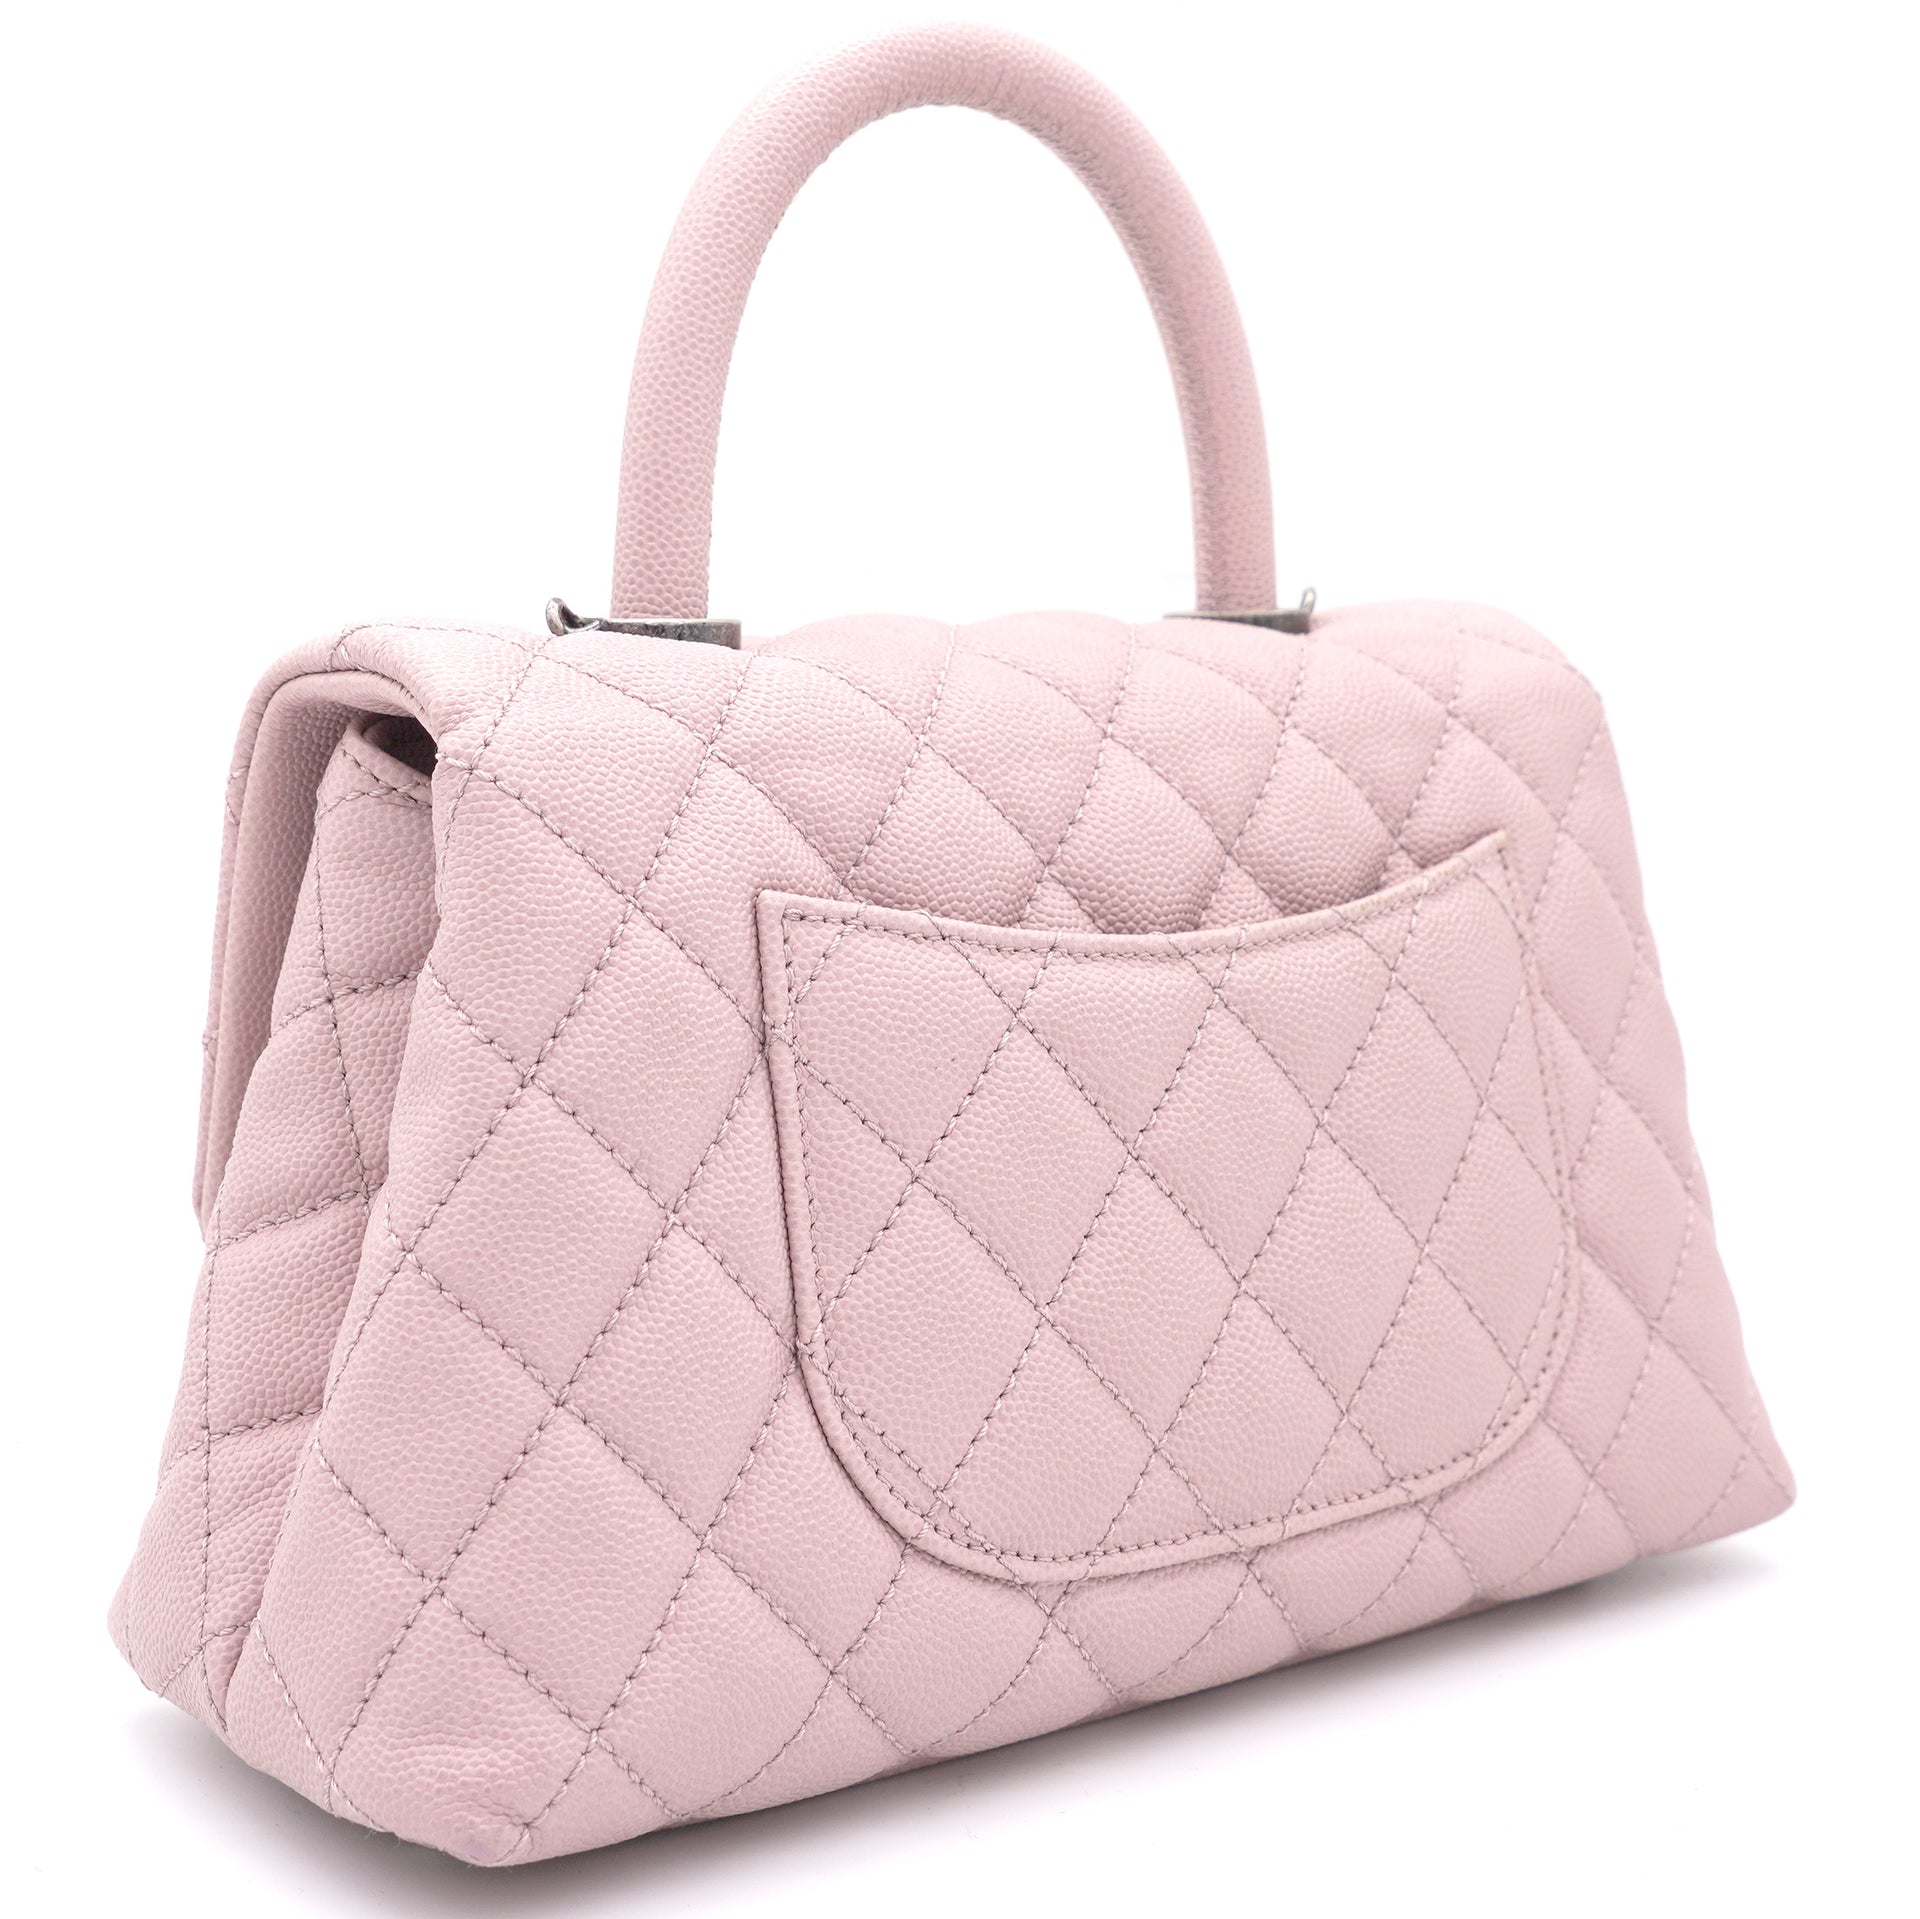 Coco handle leather handbag Chanel Pink in Leather - 31261858